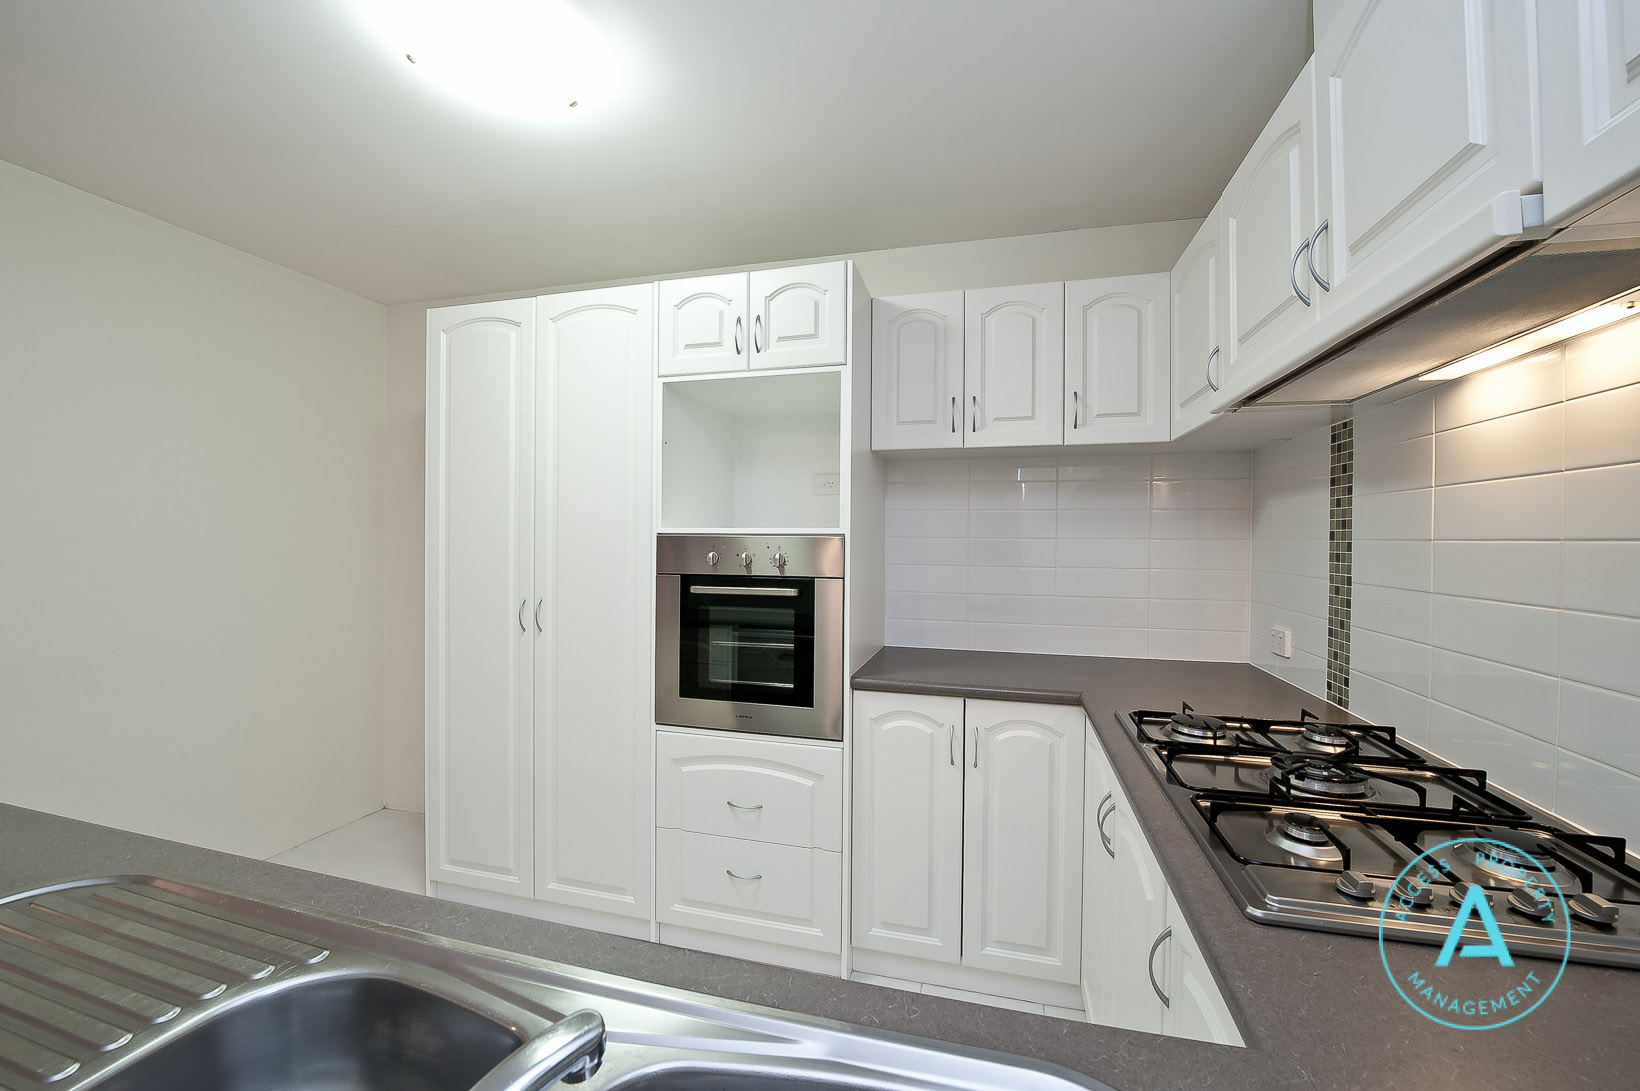 Access Property Management 7/8 Forster Avenue Kitchen